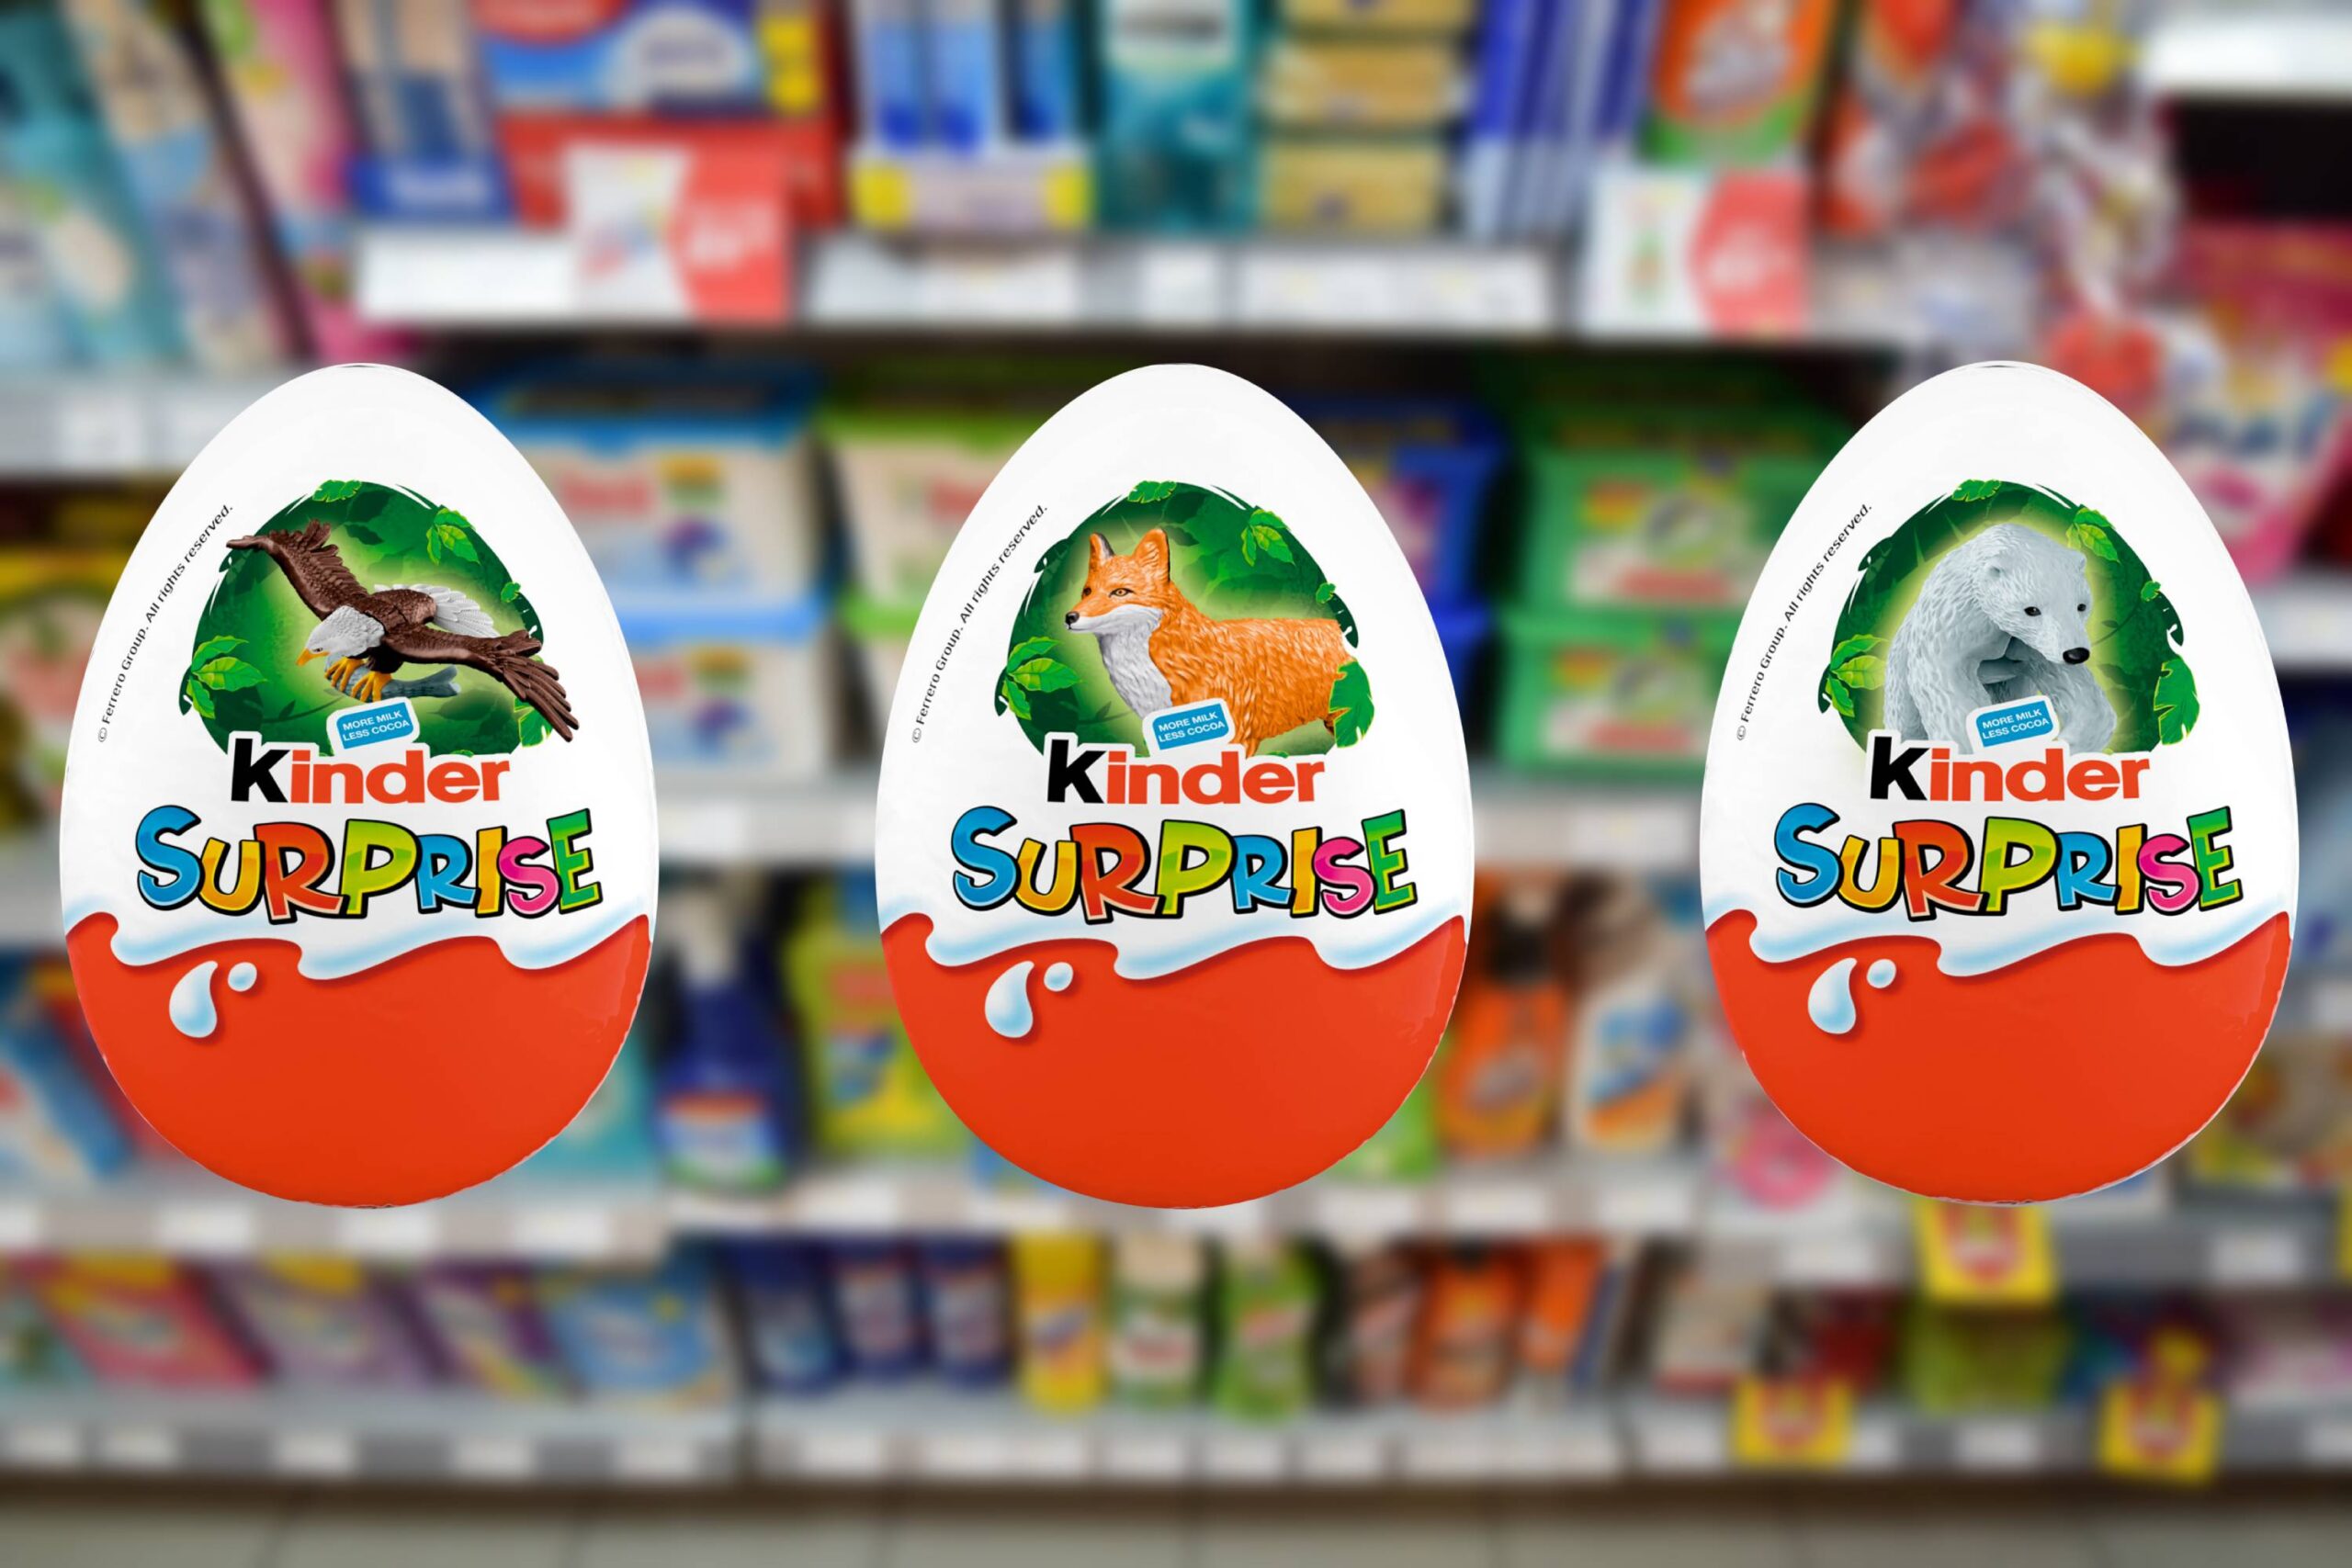 Kinder Cards now available in the UK - Better Retailing